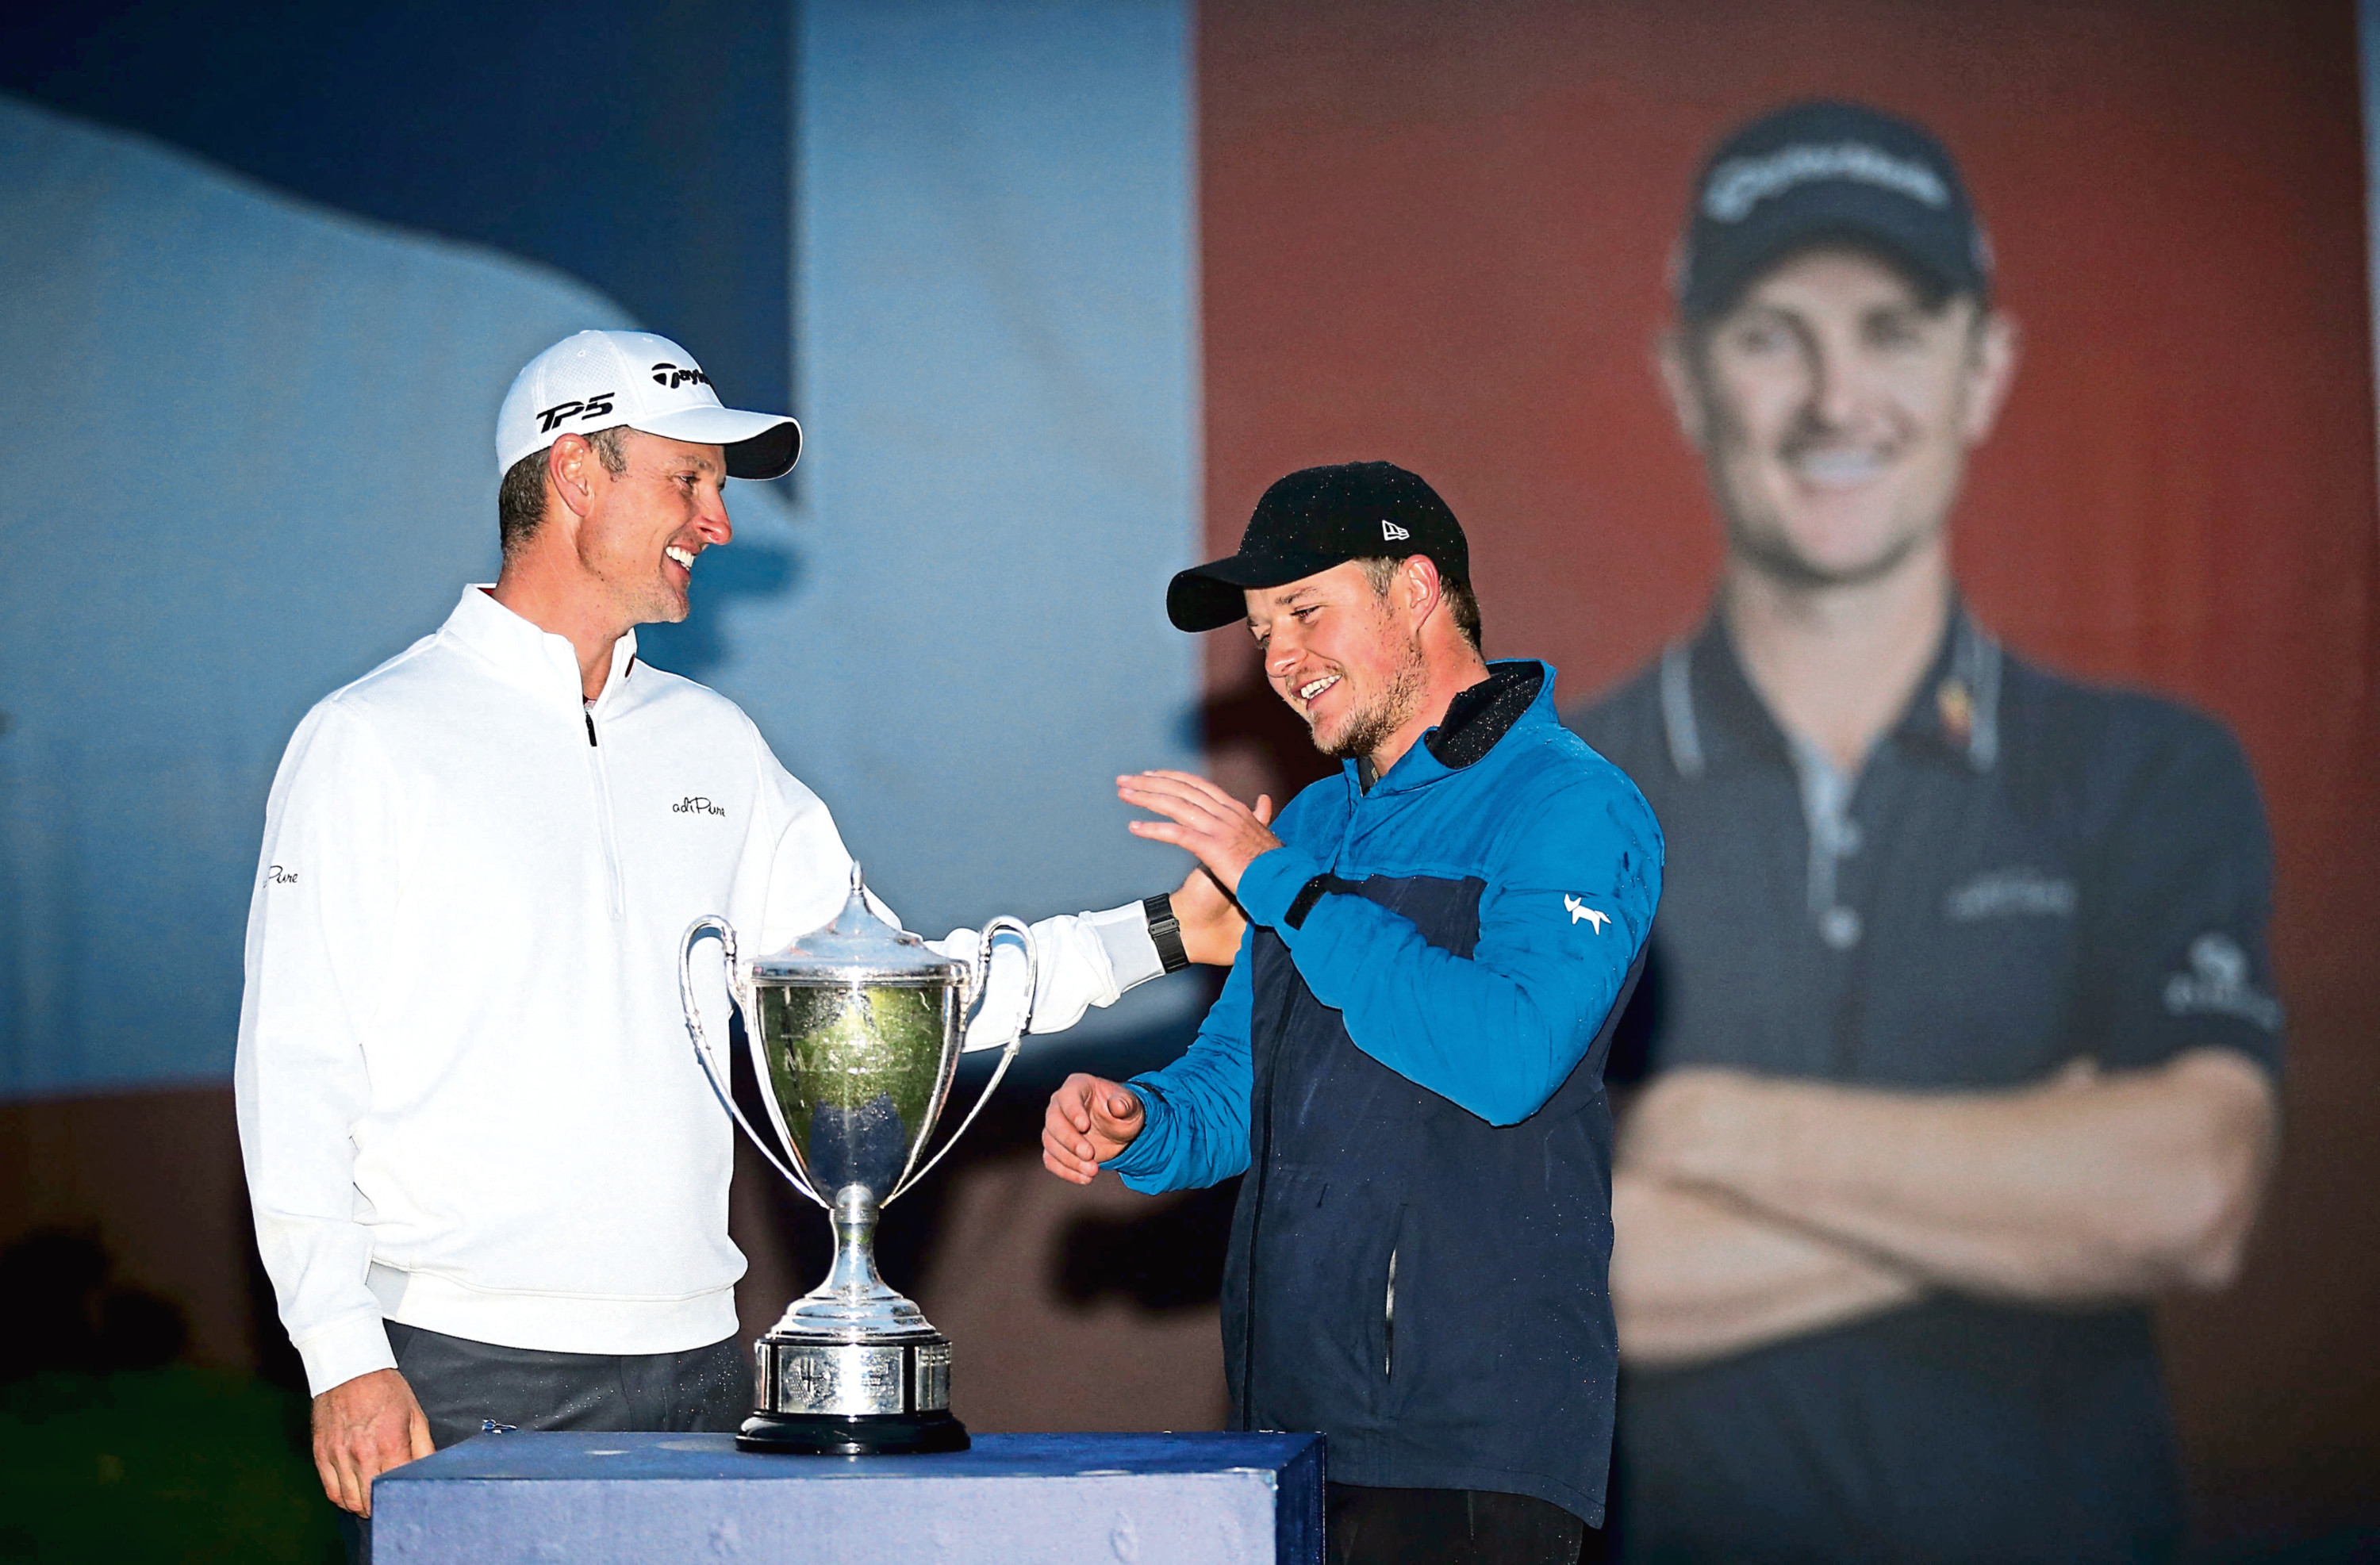 Justin Rose presents the trophy to Eddie Pepperell after winning during day four of the British Masters at Walton Heath Golf Club, Surrey. PRESS ASSOCIATION Photo. Picture date: Sunday October 14, 2018. See PA story GOLF Masters. Photo credit should read: Steven Paston/PA Wire. RESTRICTIONS: Editorial use only, No commercial use without prior permission.